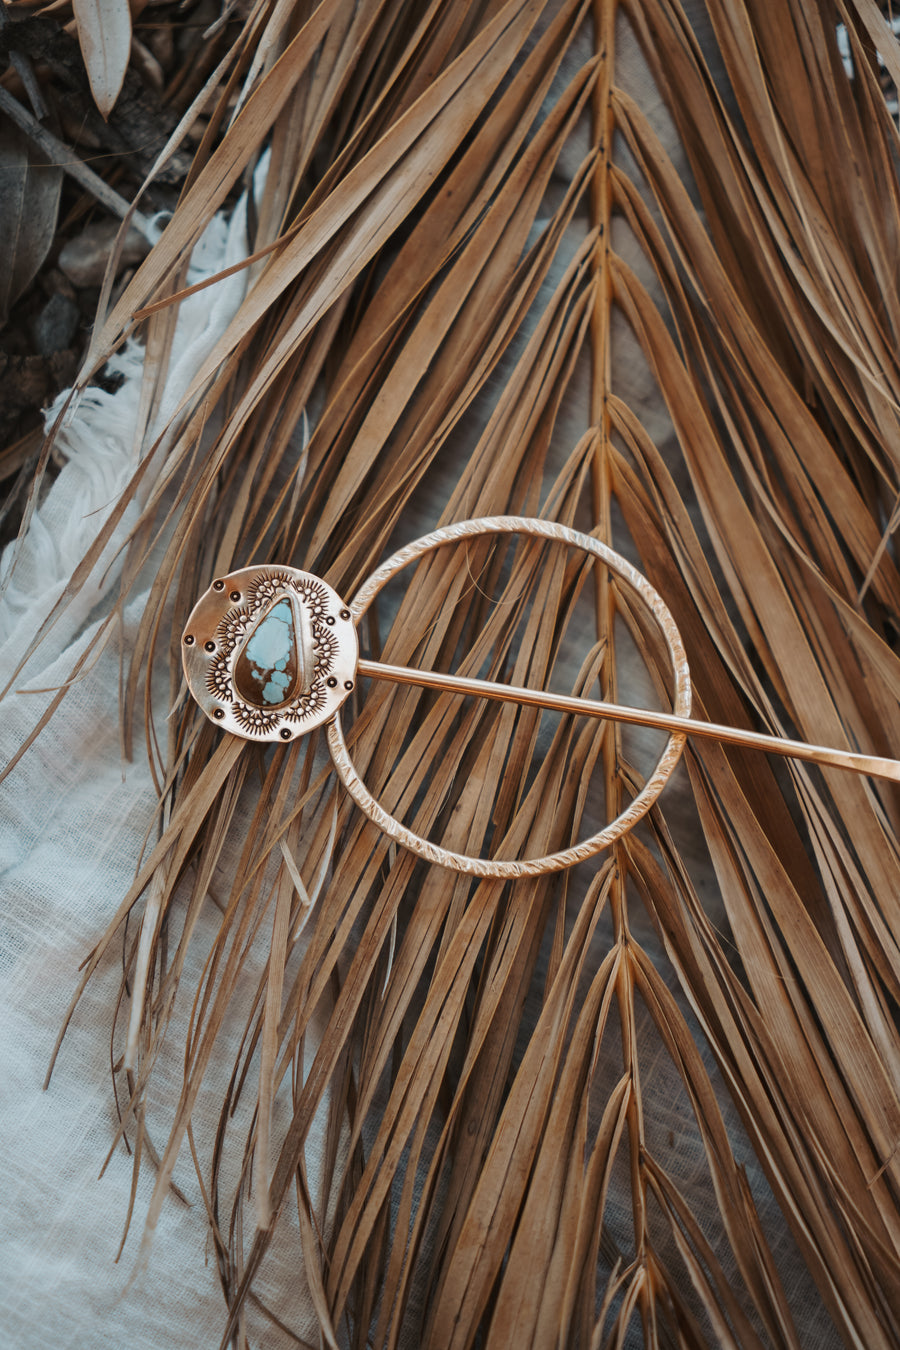 The Wanderer Hairpin in Sandhill Turquoise